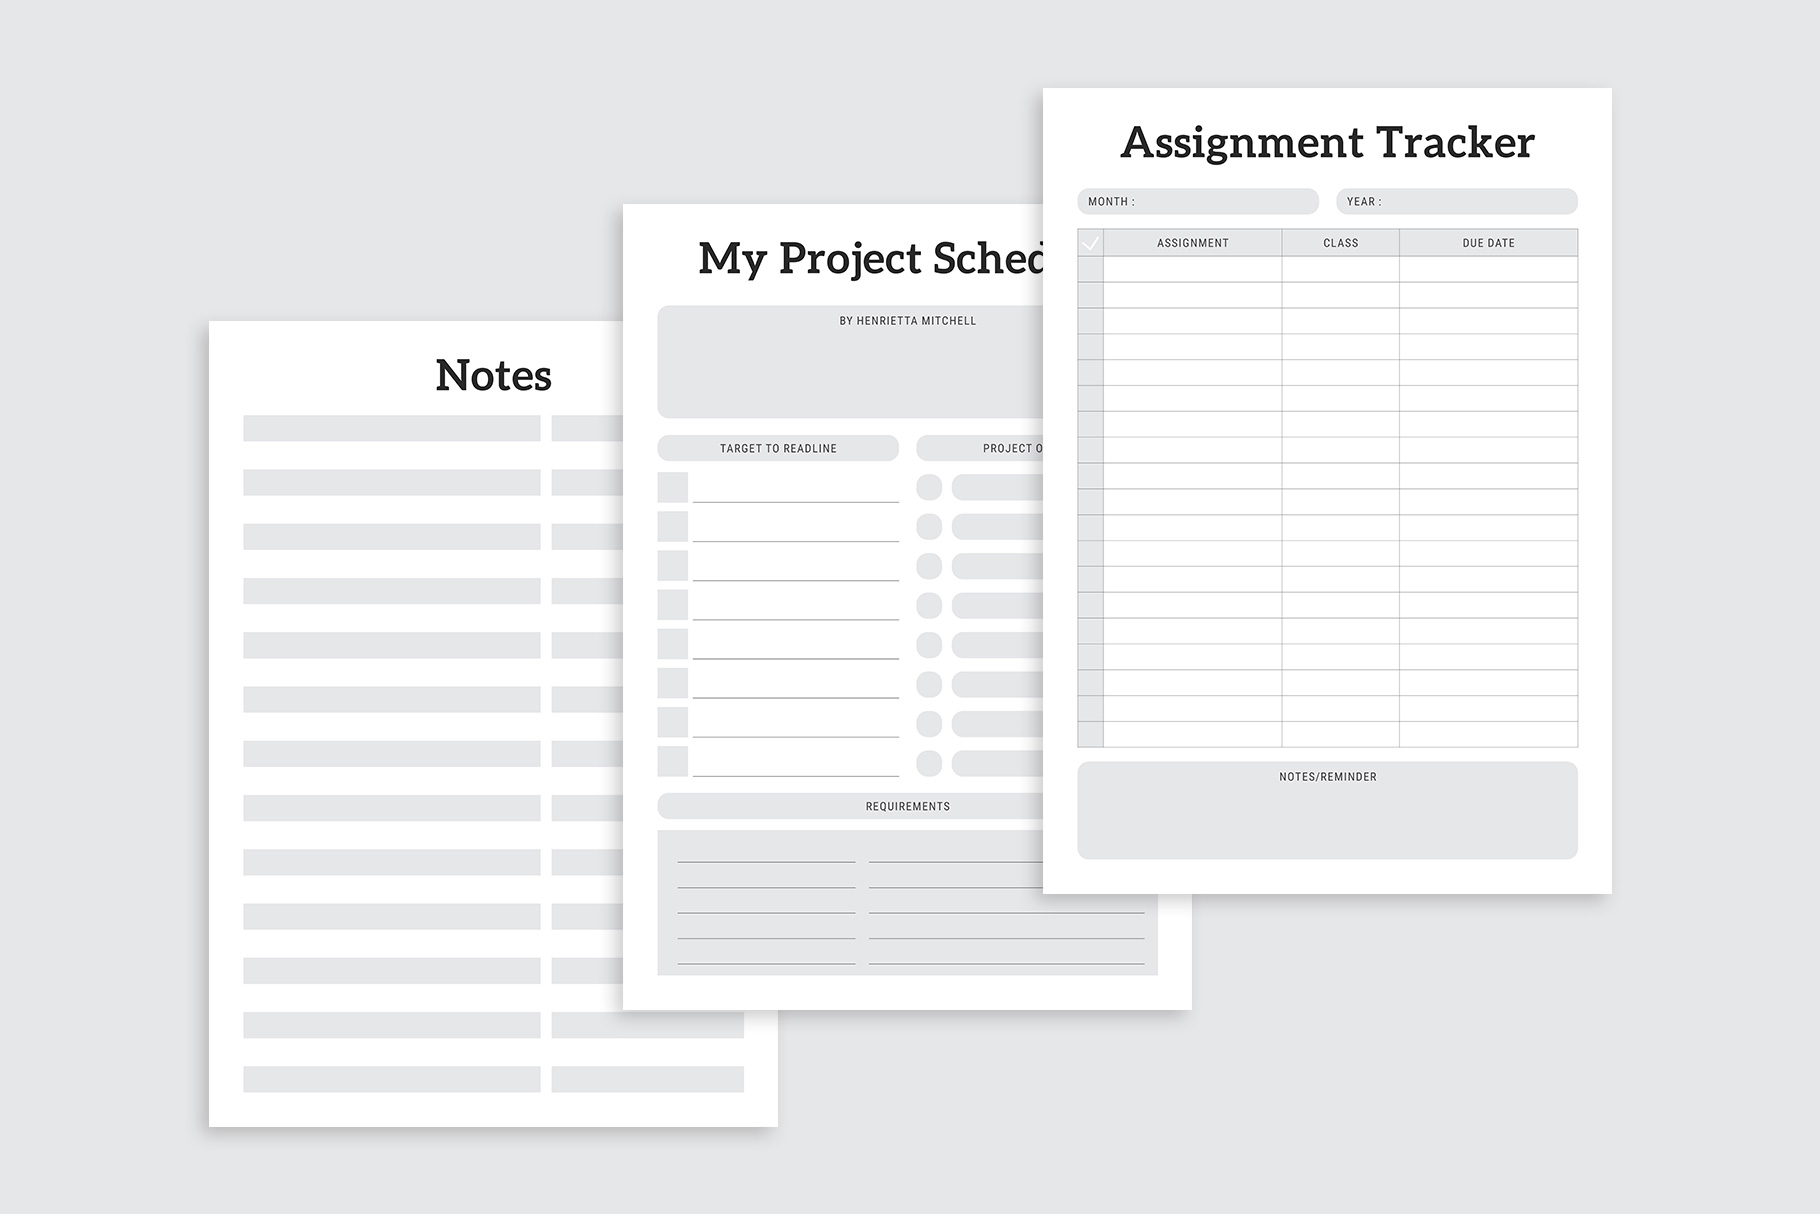 Assignment Tracker, Project Schedule & Notes designs.